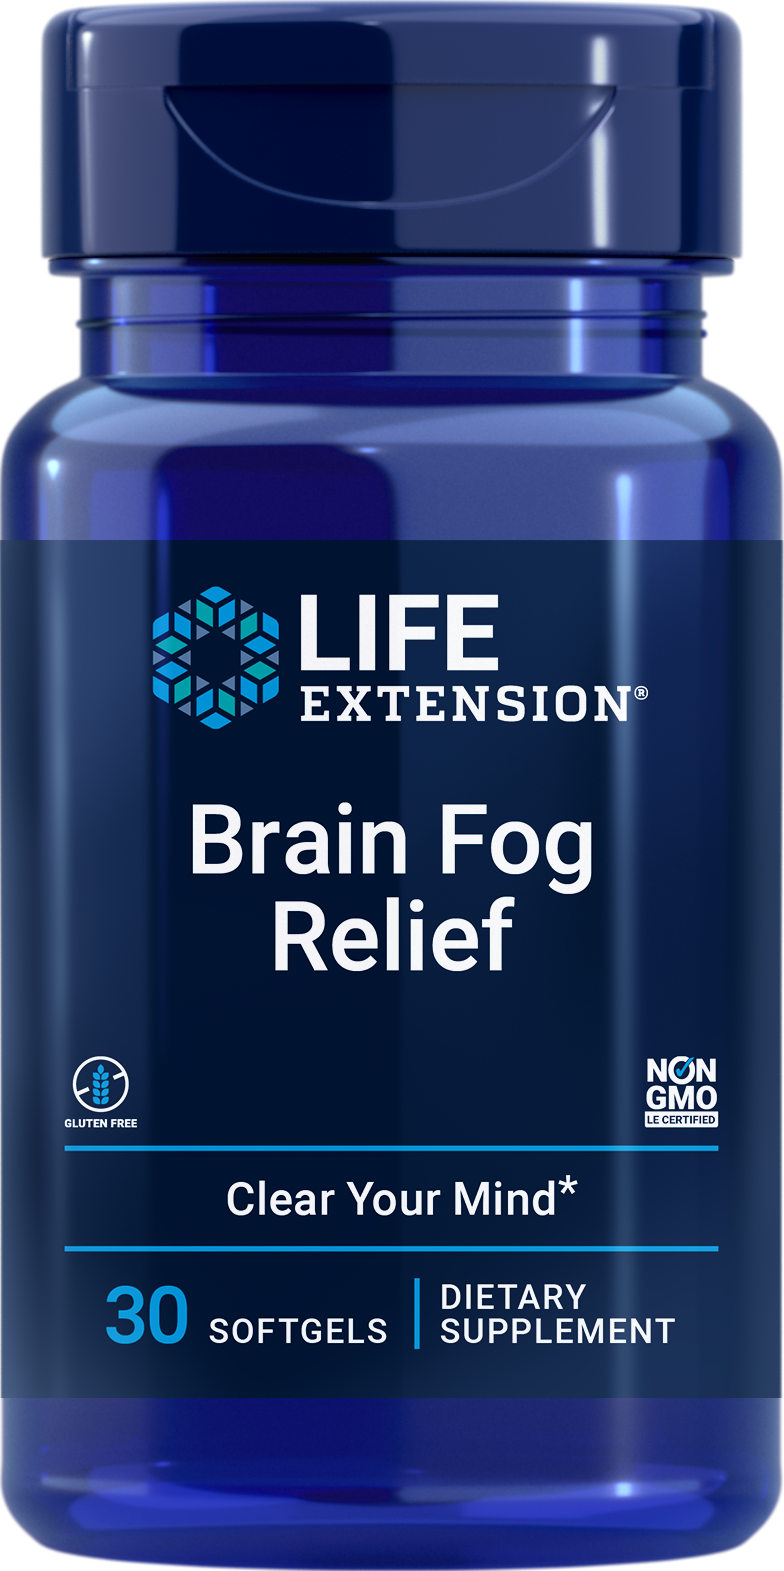 Life Extension Launches New Brain Fog Relief Supplement